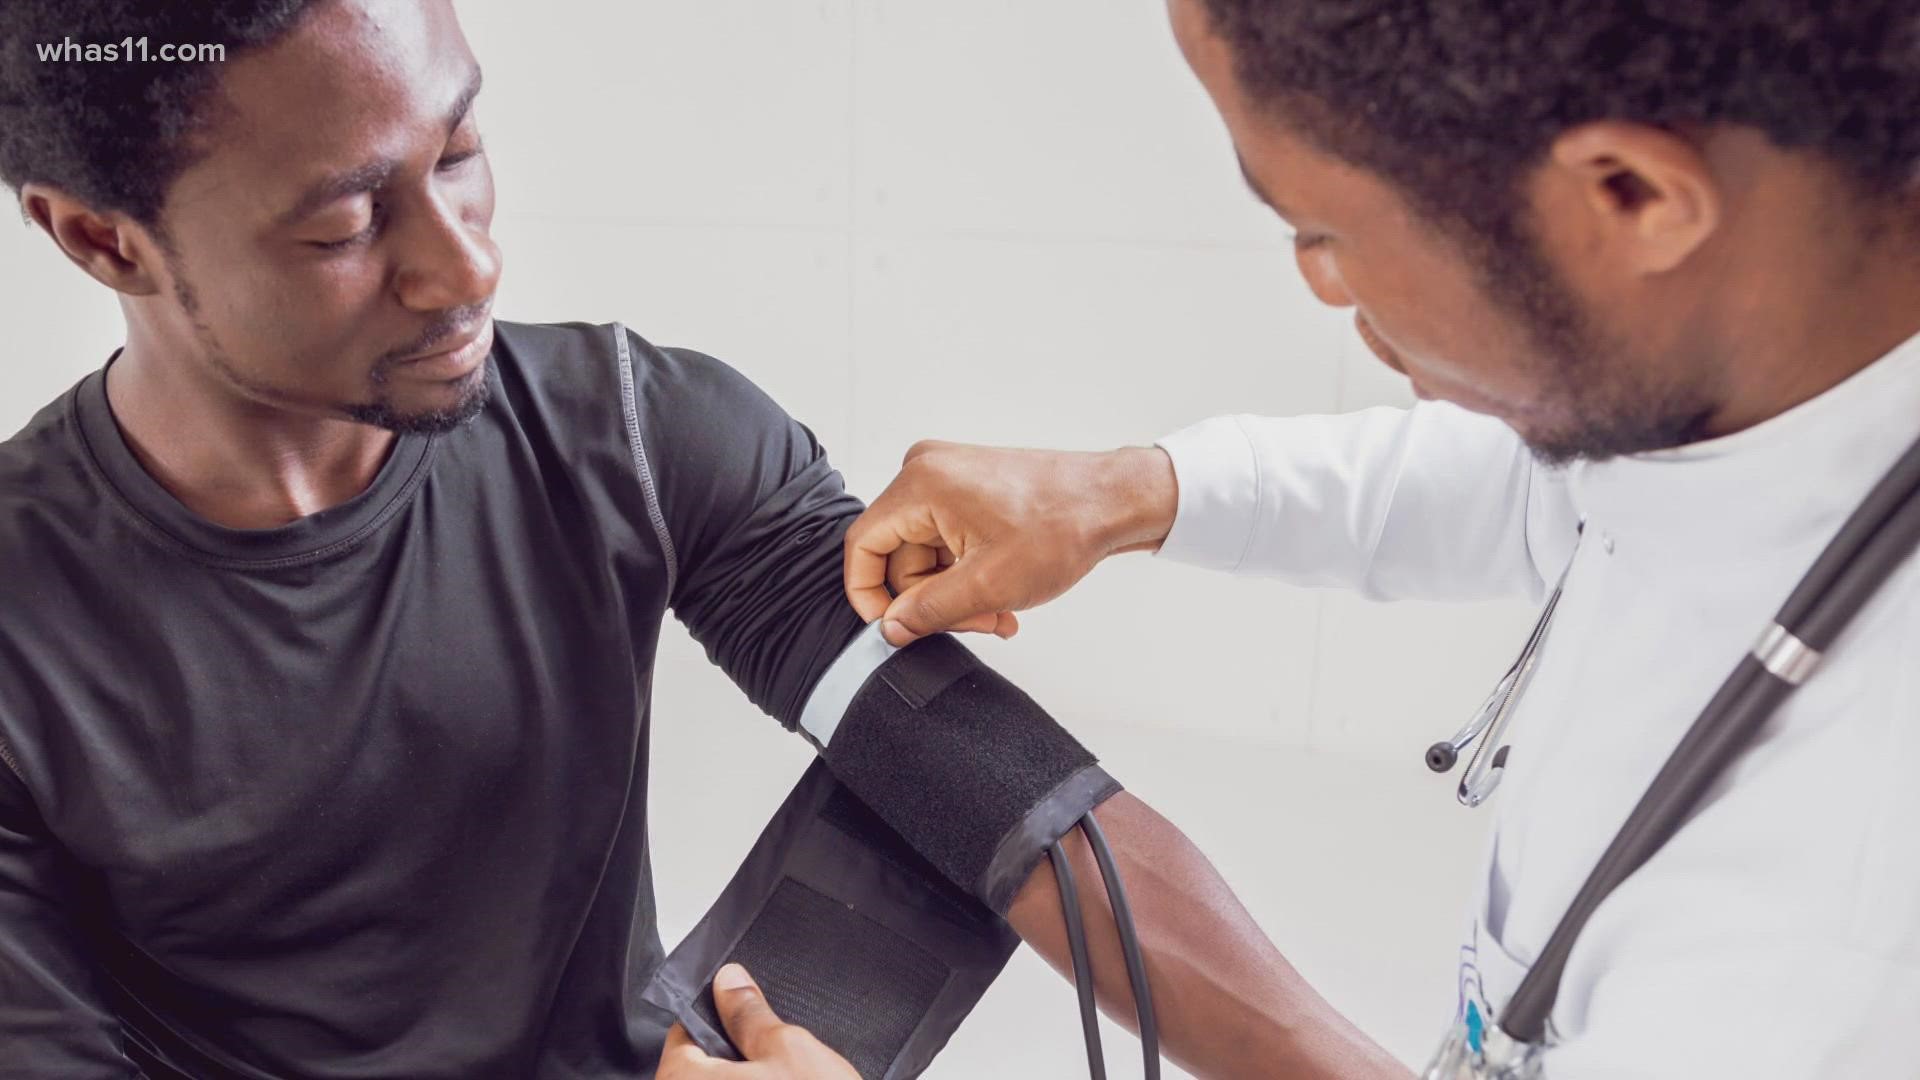 African American men, especially, are less likely than all other minority groups to seek primary care, preventative care, or healthcare in general.